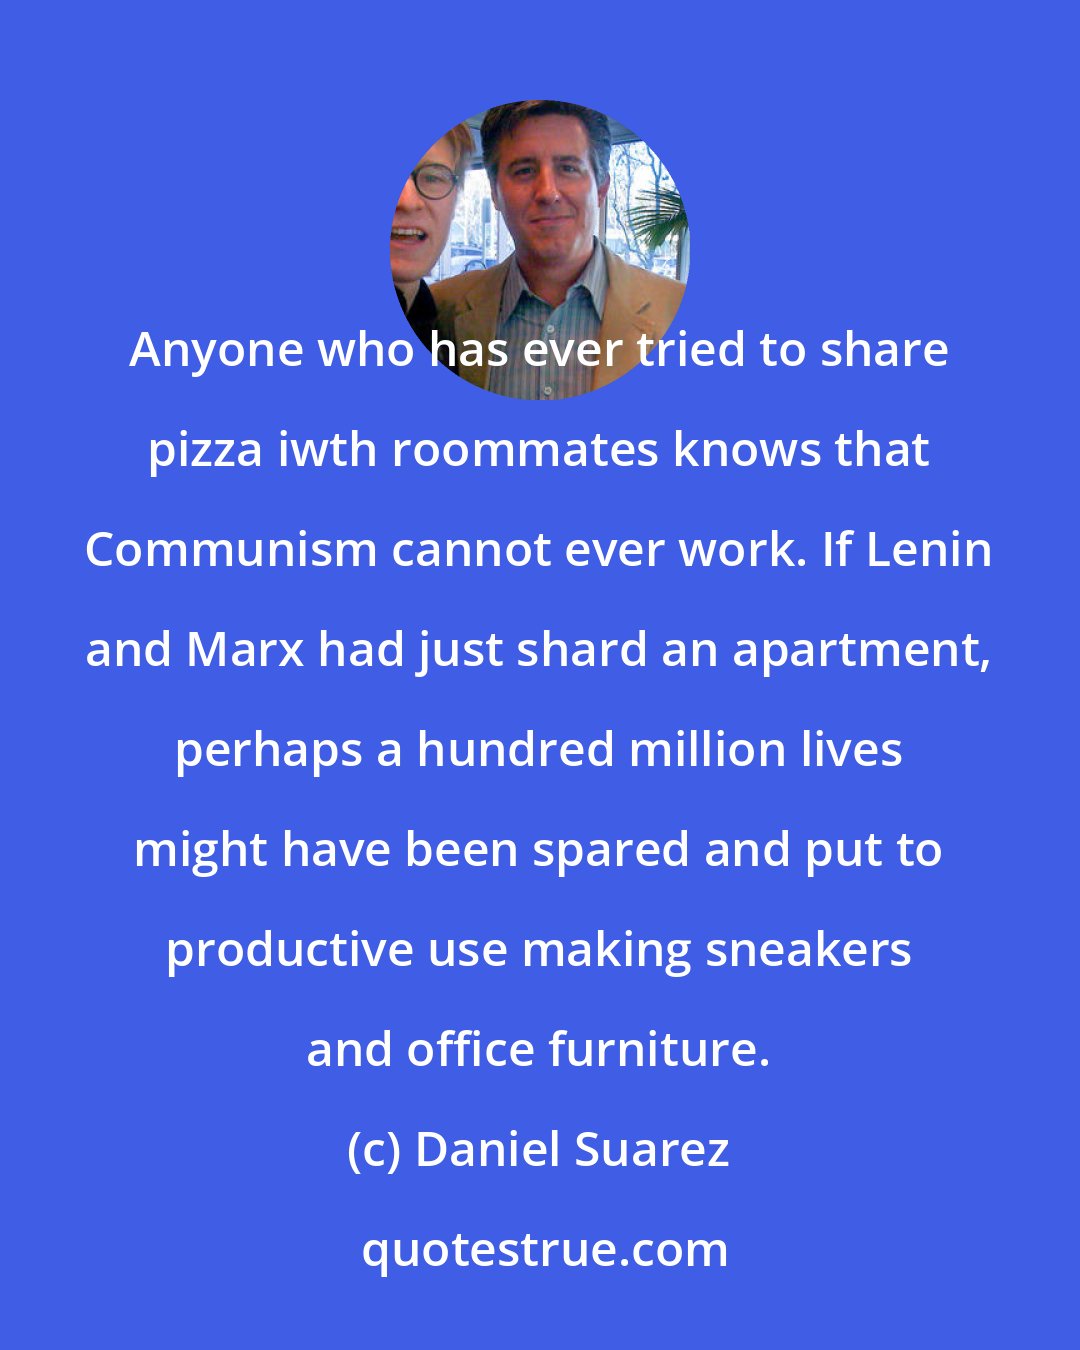 Daniel Suarez: Anyone who has ever tried to share pizza iwth roommates knows that Communism cannot ever work. If Lenin and Marx had just shard an apartment, perhaps a hundred million lives might have been spared and put to productive use making sneakers and office furniture.